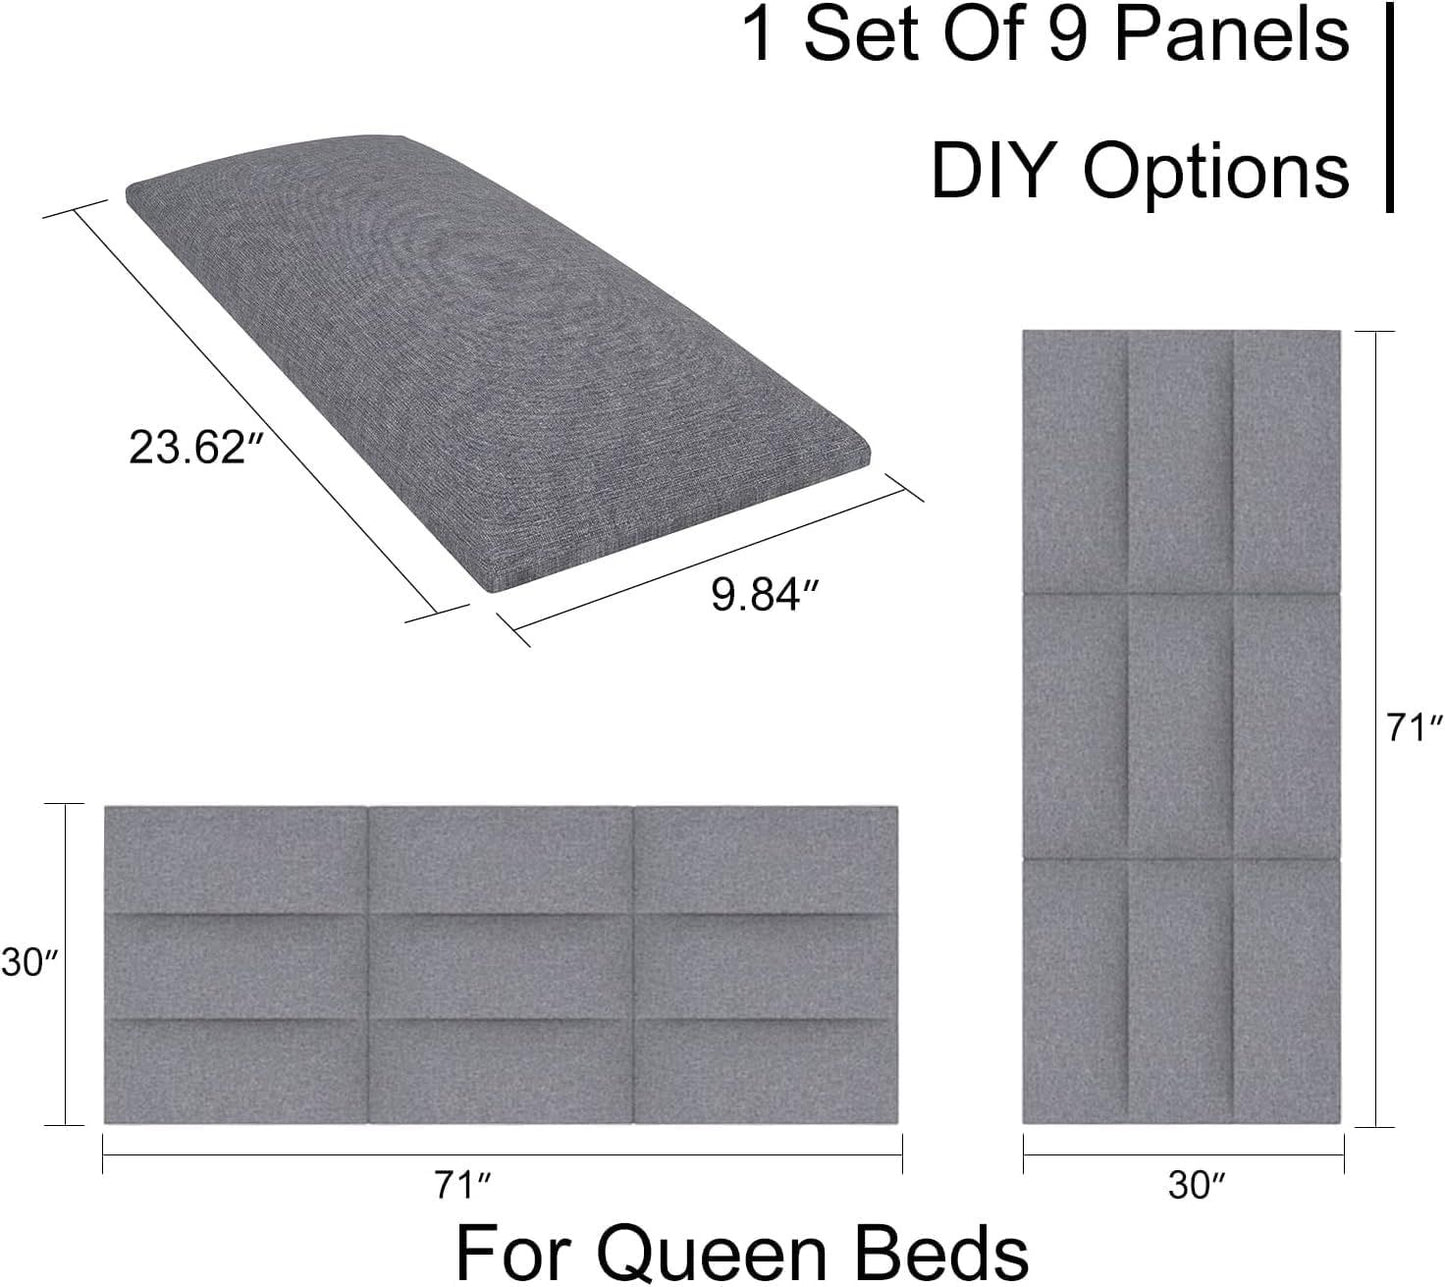 Tbfit Upholstered Wall Mounted Headboard, Soundproof Peel and Stick Headboards for Queen Size Bed, Tufted Floating Dorm Bed Pack of 9 Panels Sized 10" - Selzalot